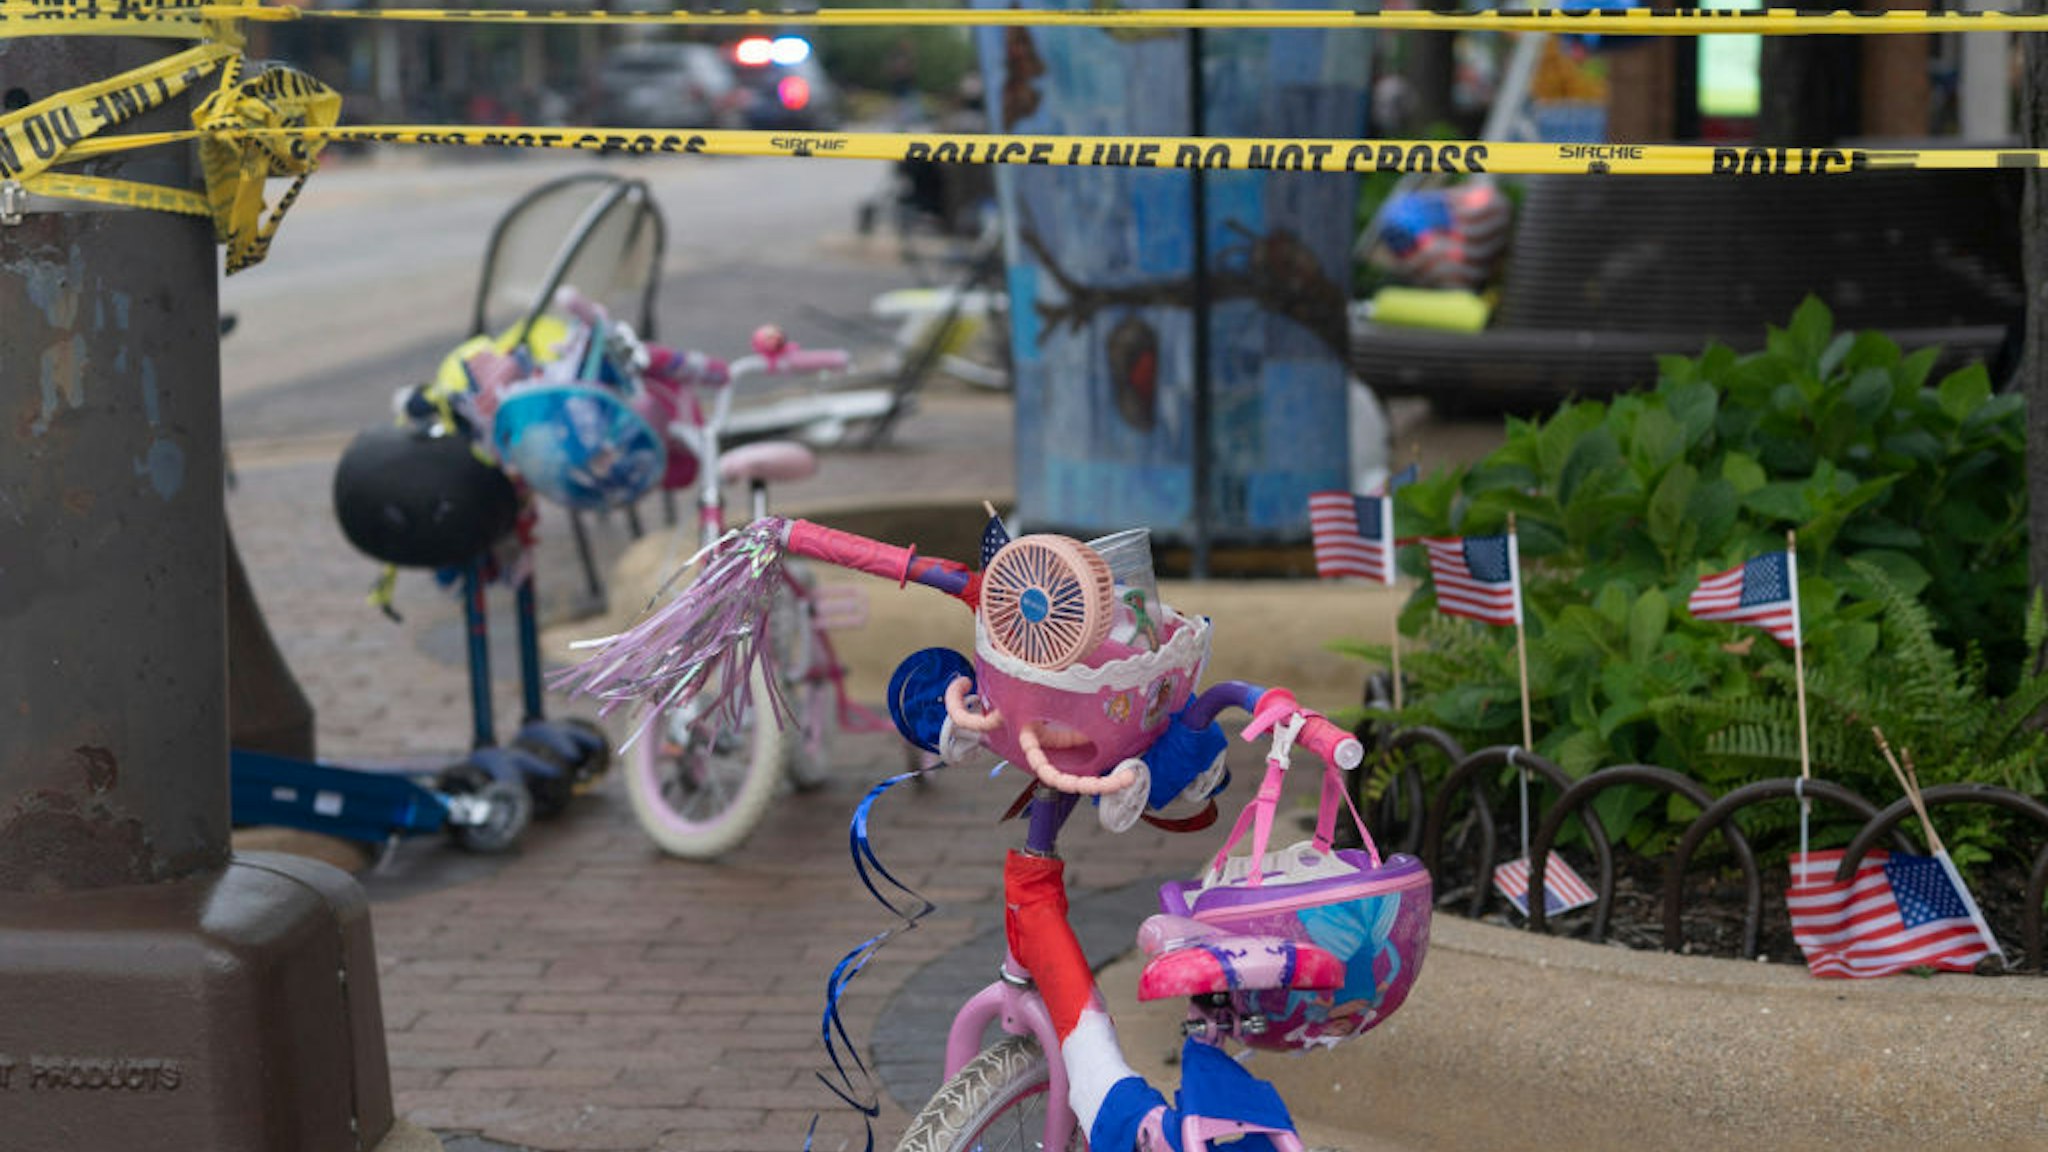 Police crime tape is seen around the area where children's bicycles and baby strollers stand near the scene of the Fourth of July parade shooting in Highland Park, Illinois on July 4, 2022. - A shooter opened fire Monday during a parade to mark US Independence Day in the state of Illinois, killing at least six people, officials said. "At this time, two dozen people have been transported to Highland Park hospital. Six are confirmed deceased," Commander Chris O'Neil of the city's police told journalists. The suspected shooter, who is still at large, has been described as a white male aged 18-20 with longer black hair, O'Neil said. (Photo by Youngrae Kim / AFP) (Photo by YOUNGRAE KIM/AFP via Getty Images)